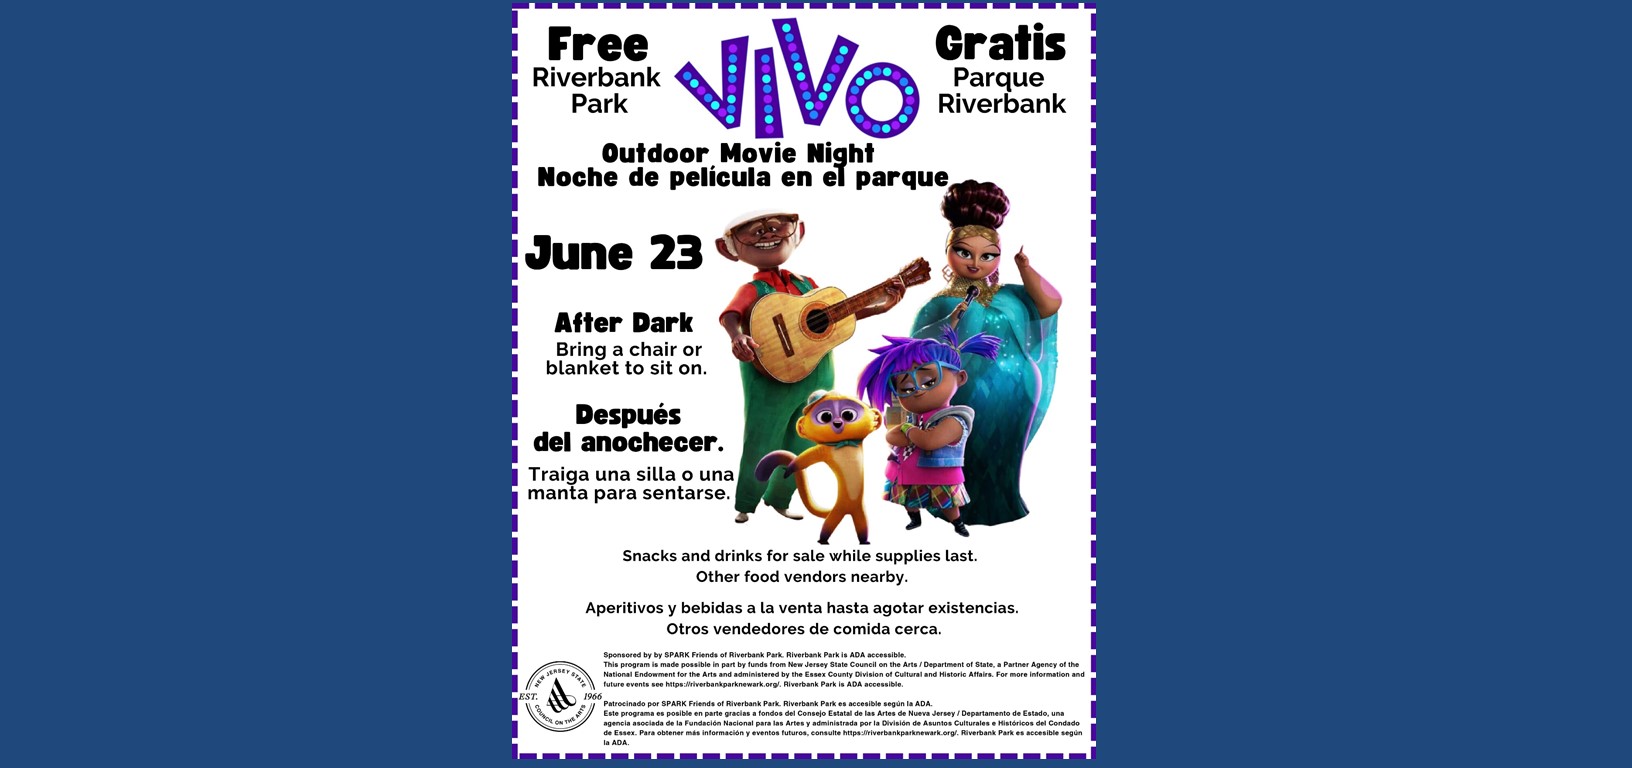 Free at Riverbank Park. Vivo Outdoor Movie Night. June 23rd. After dark. Bring a chair or blanket to sit on. Snack and drinks for sale while supplies last. Other food vendors nearby.